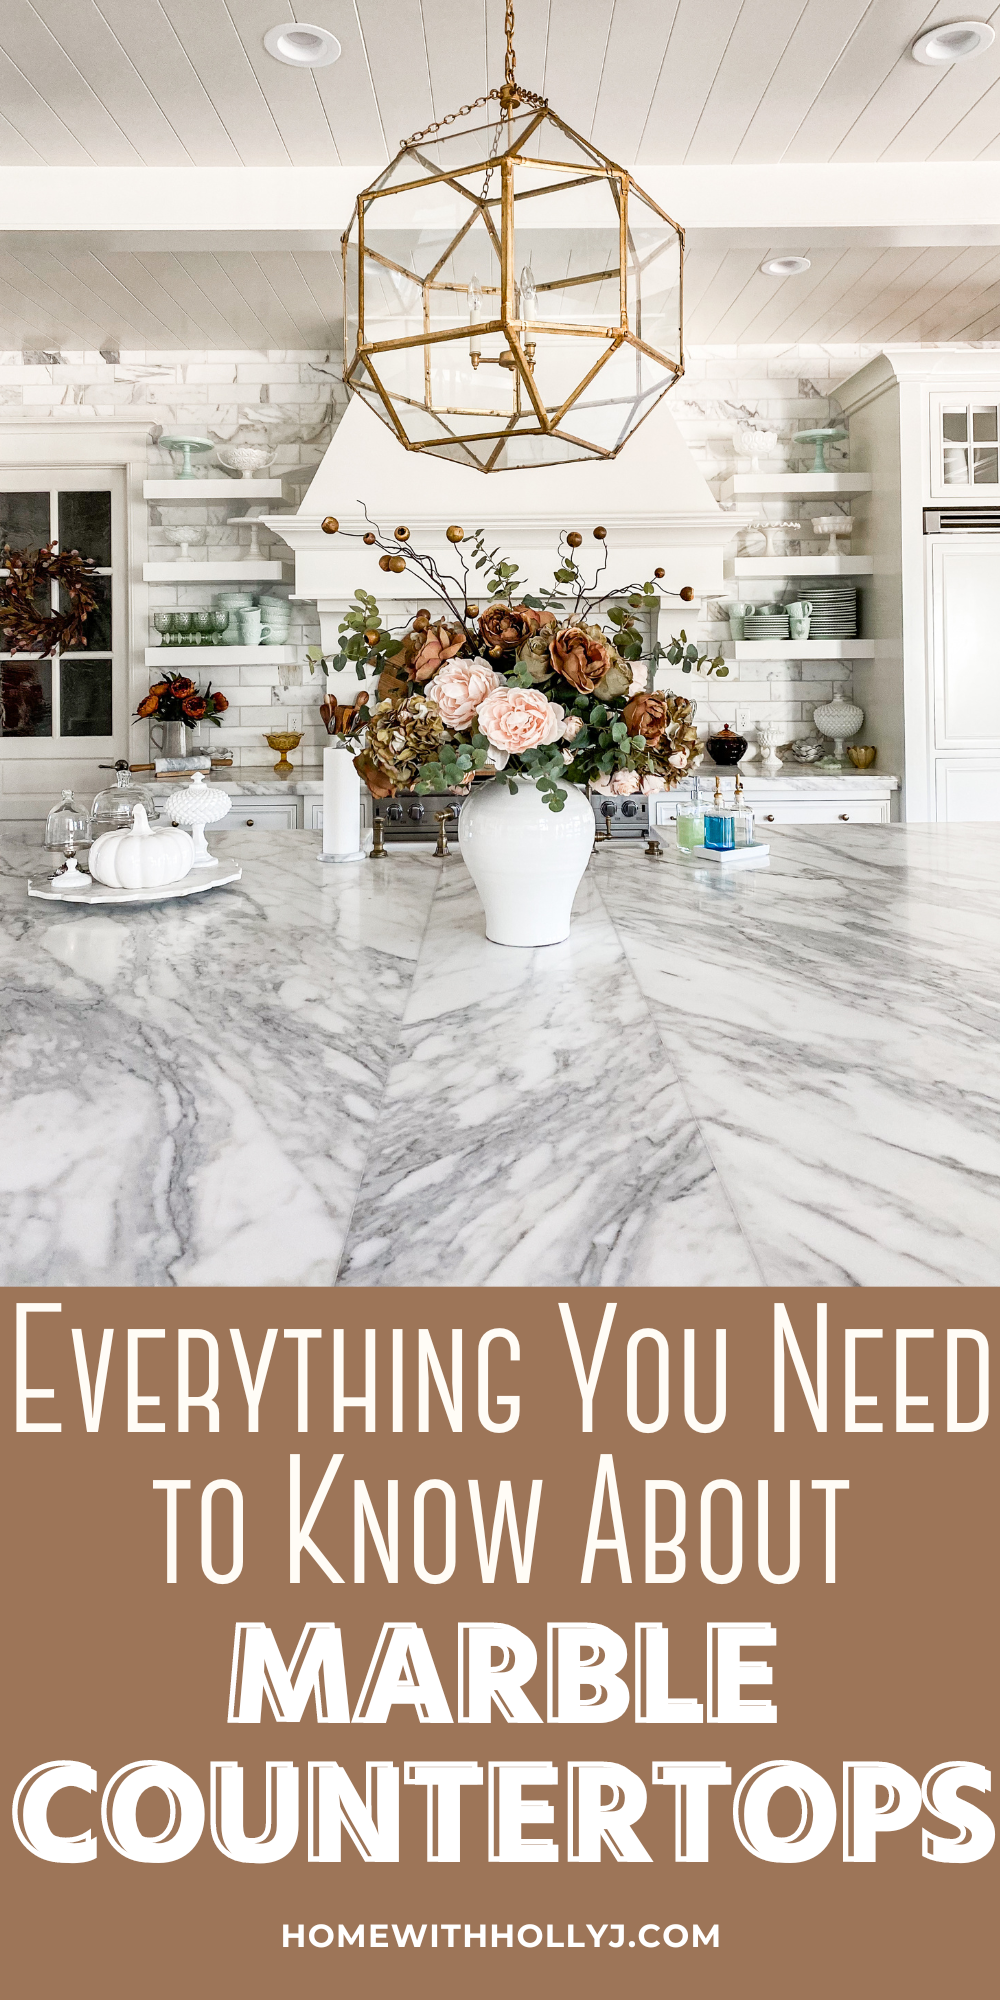 Sharing the pros and cons about marble countertops in the kitchen including how to clean them and take care of them.